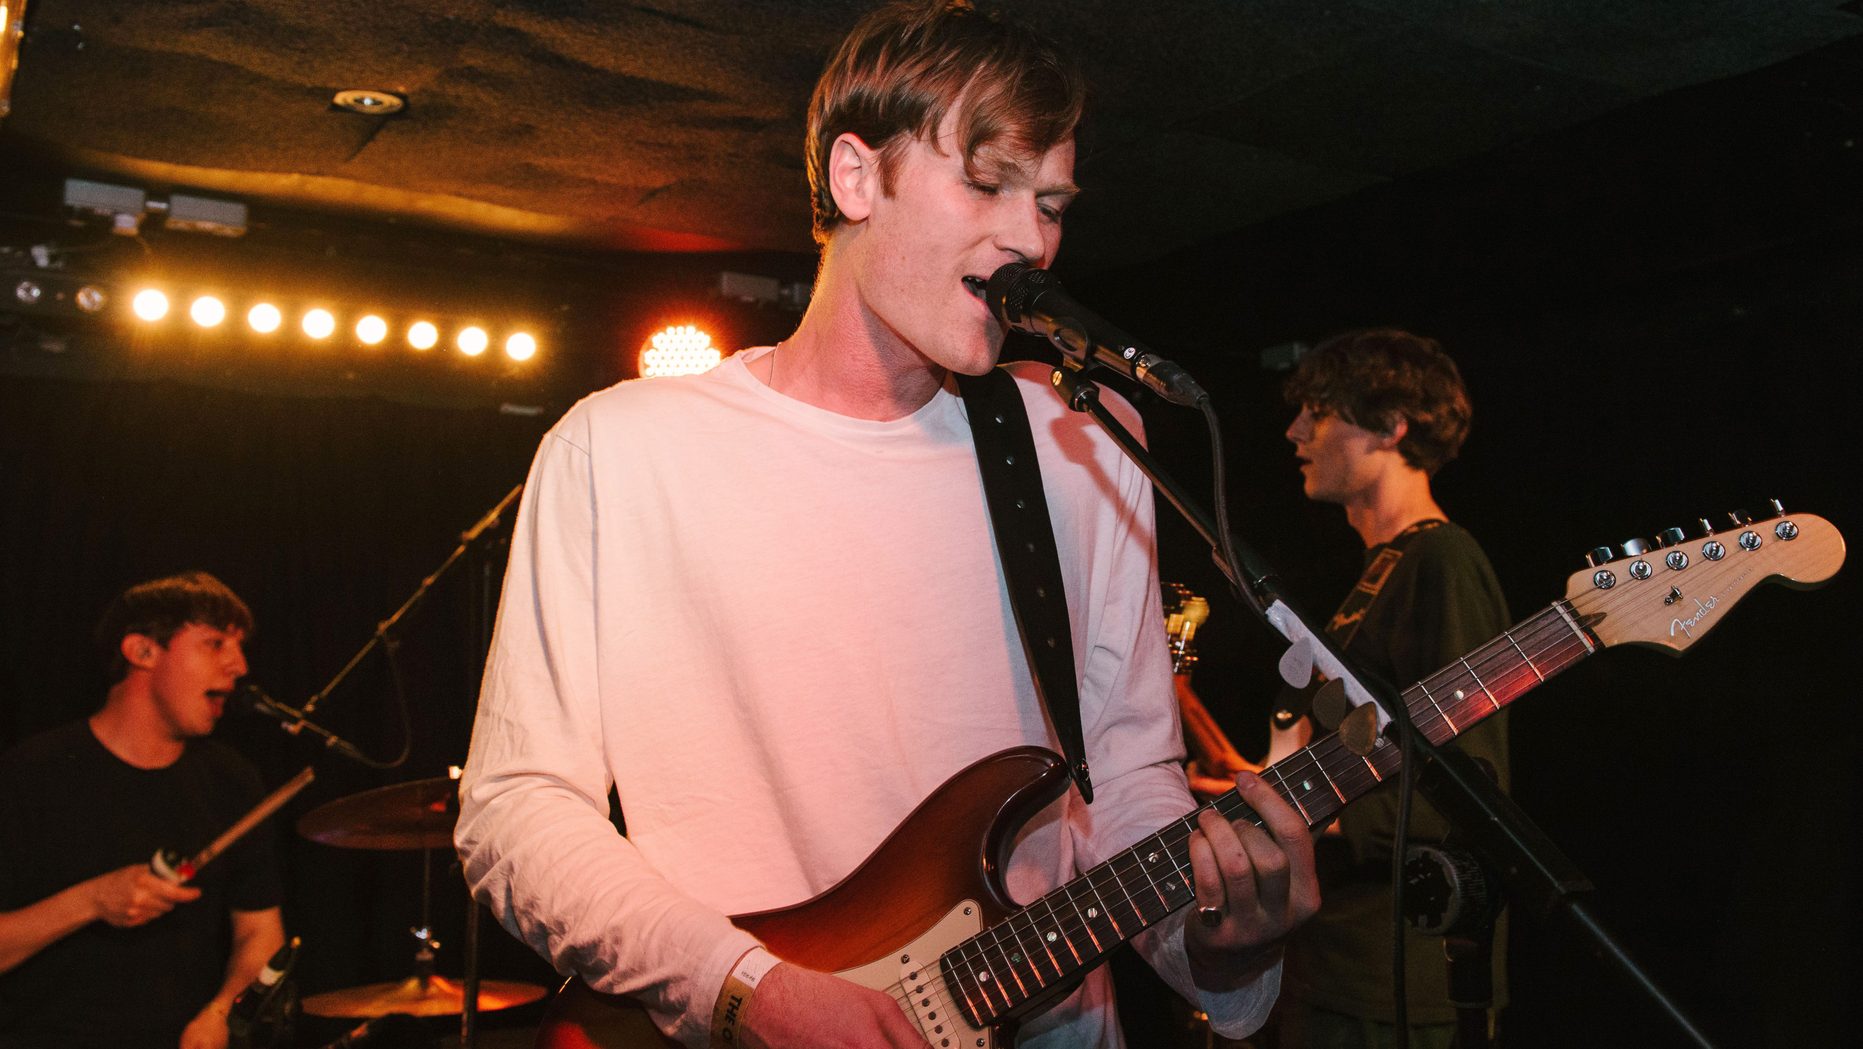 Gengahr: “This album is a lot more personal”